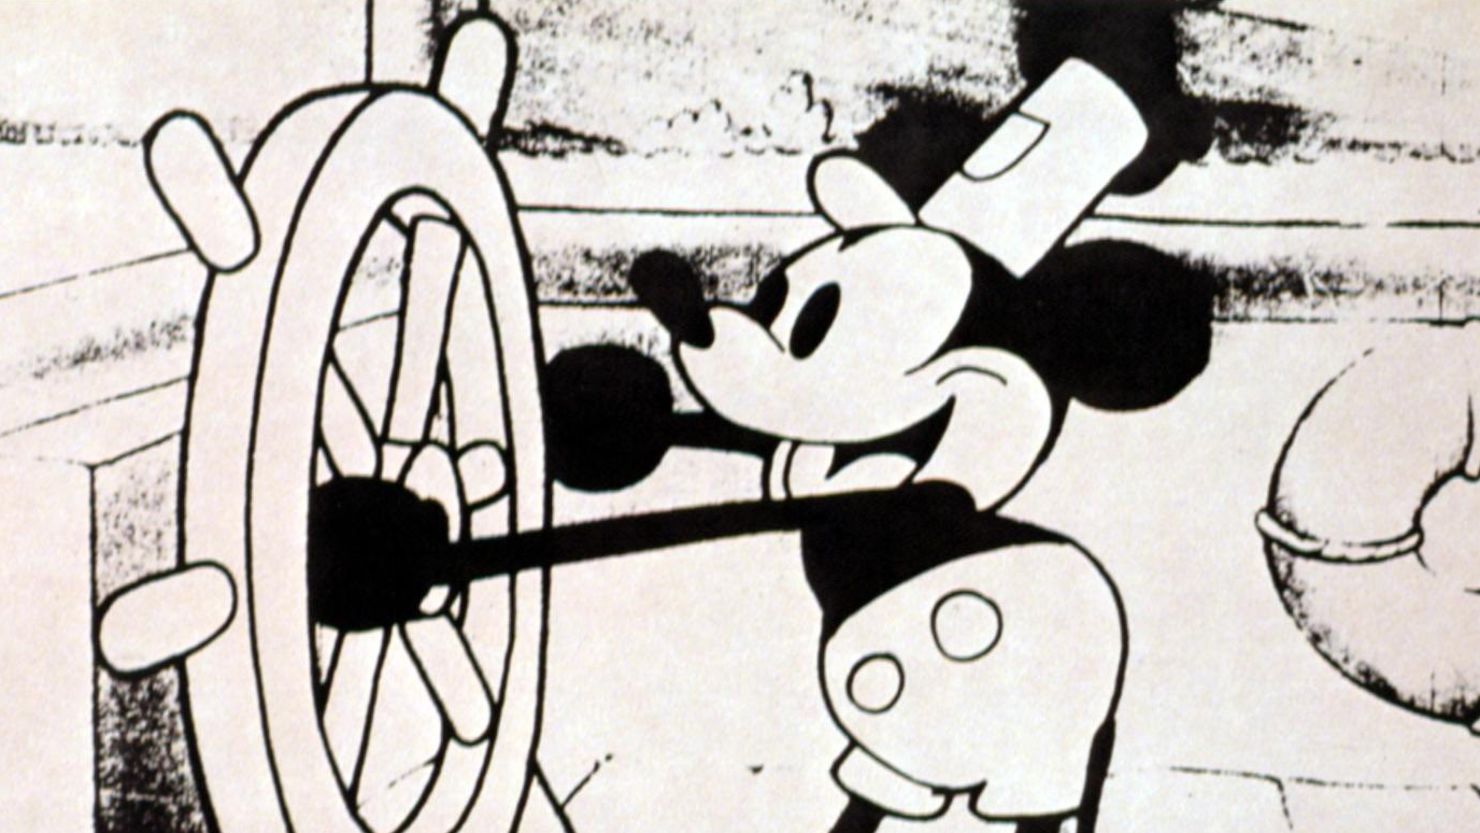 Steamboat Willie': An early version of Mickey Mouse is now in the